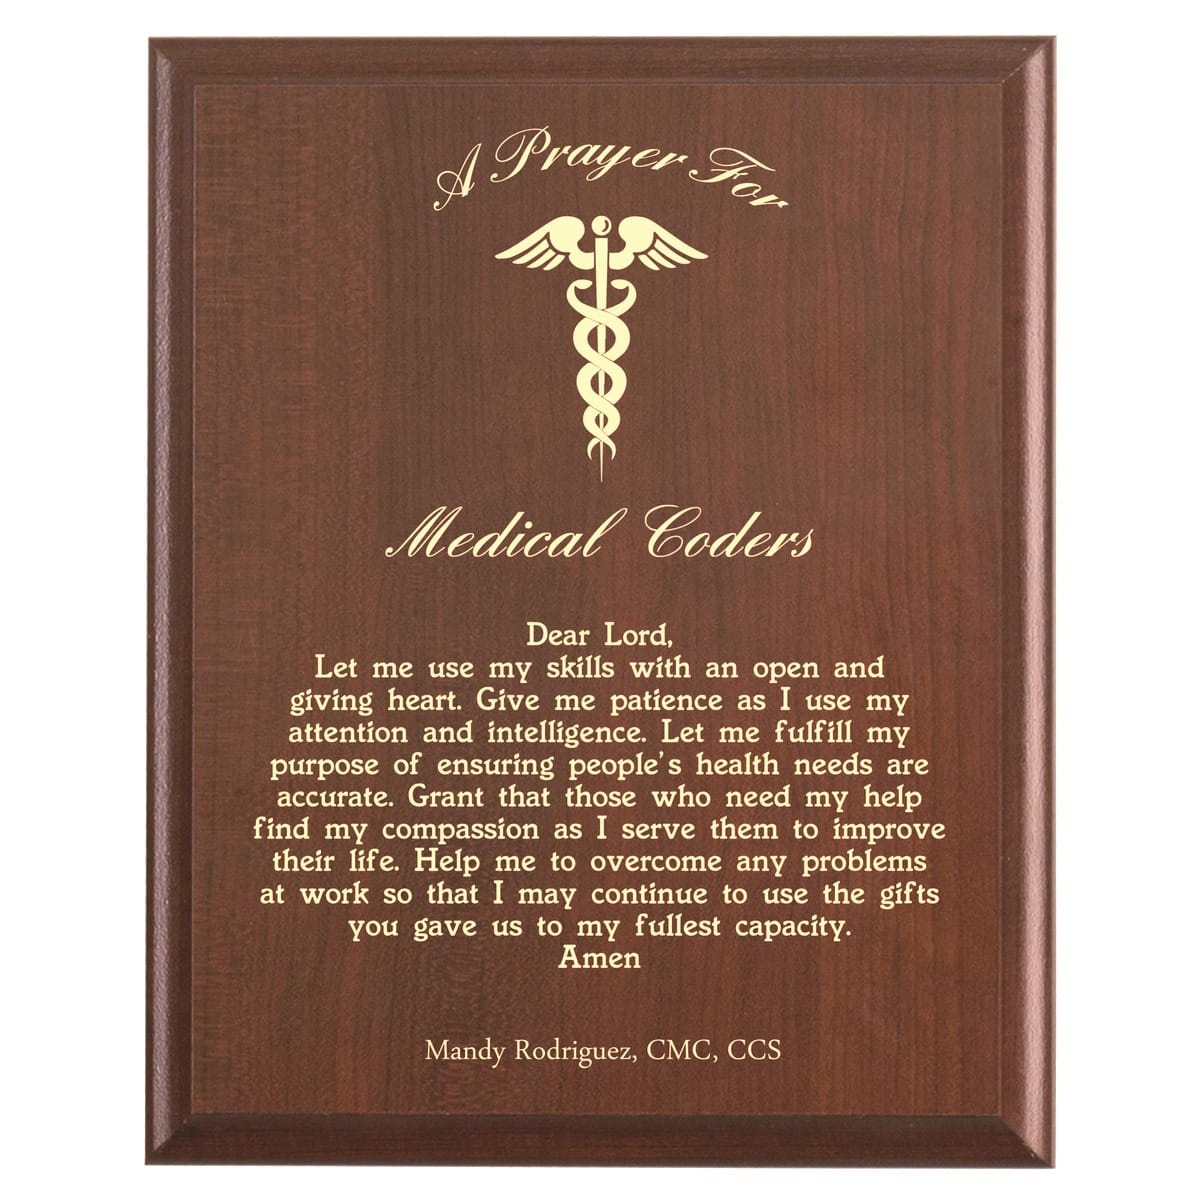 Plaque photo: Medical Coder Prayer Plaque design with free personalization. Wood style finish with customized text.